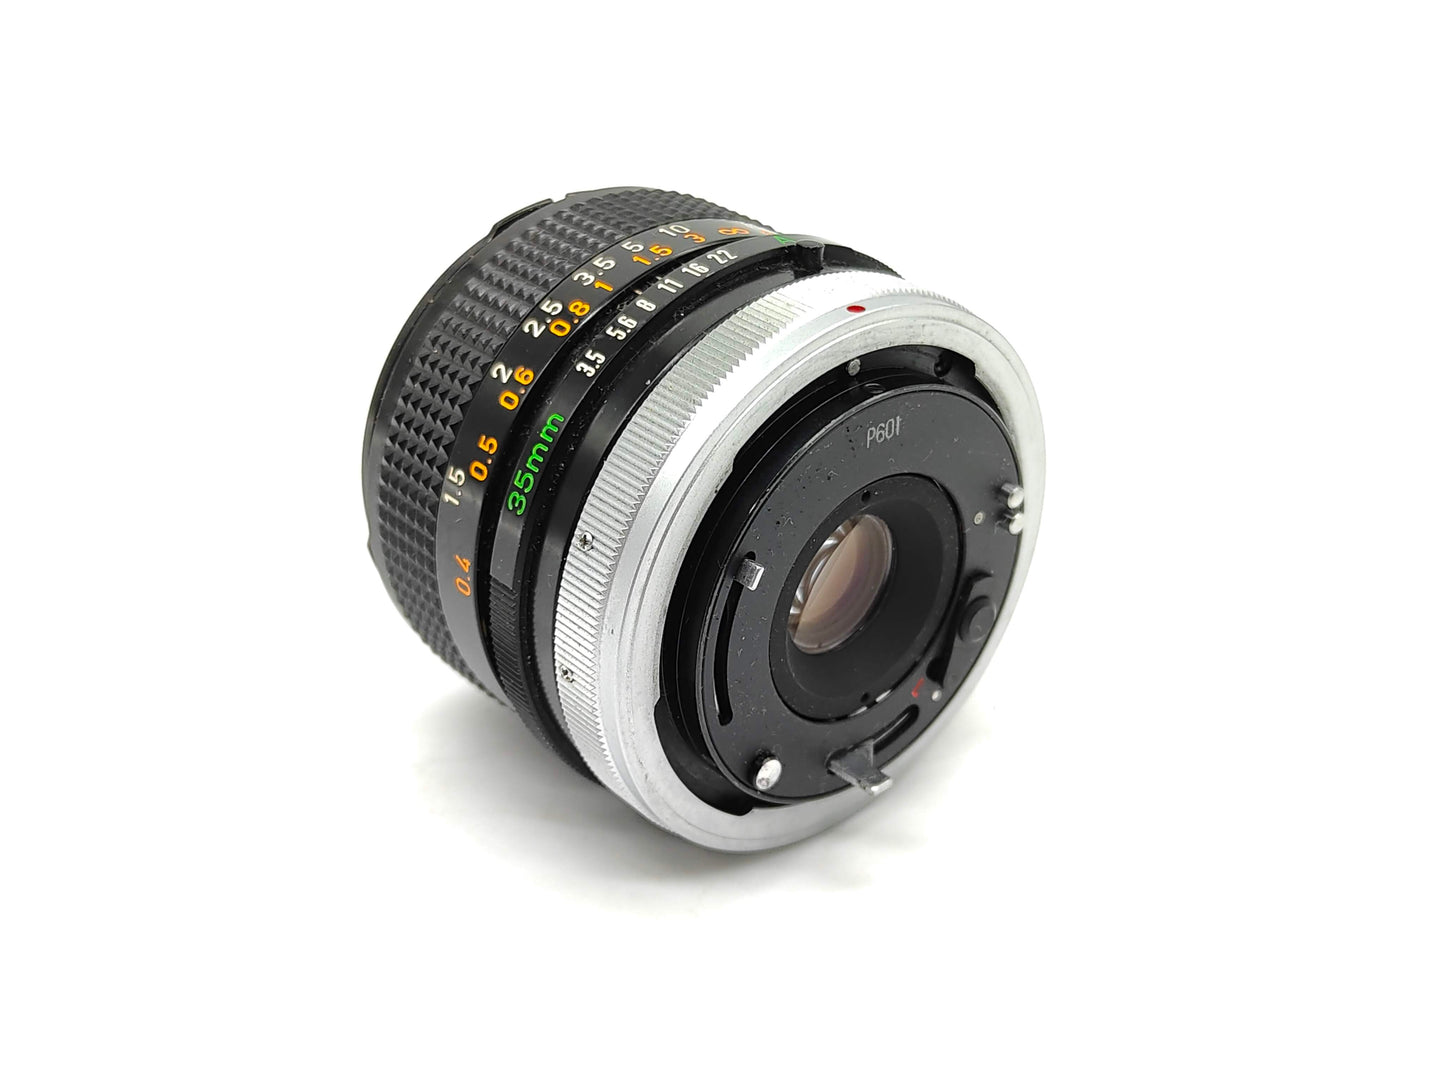 Canon 35mm wide-angle lens